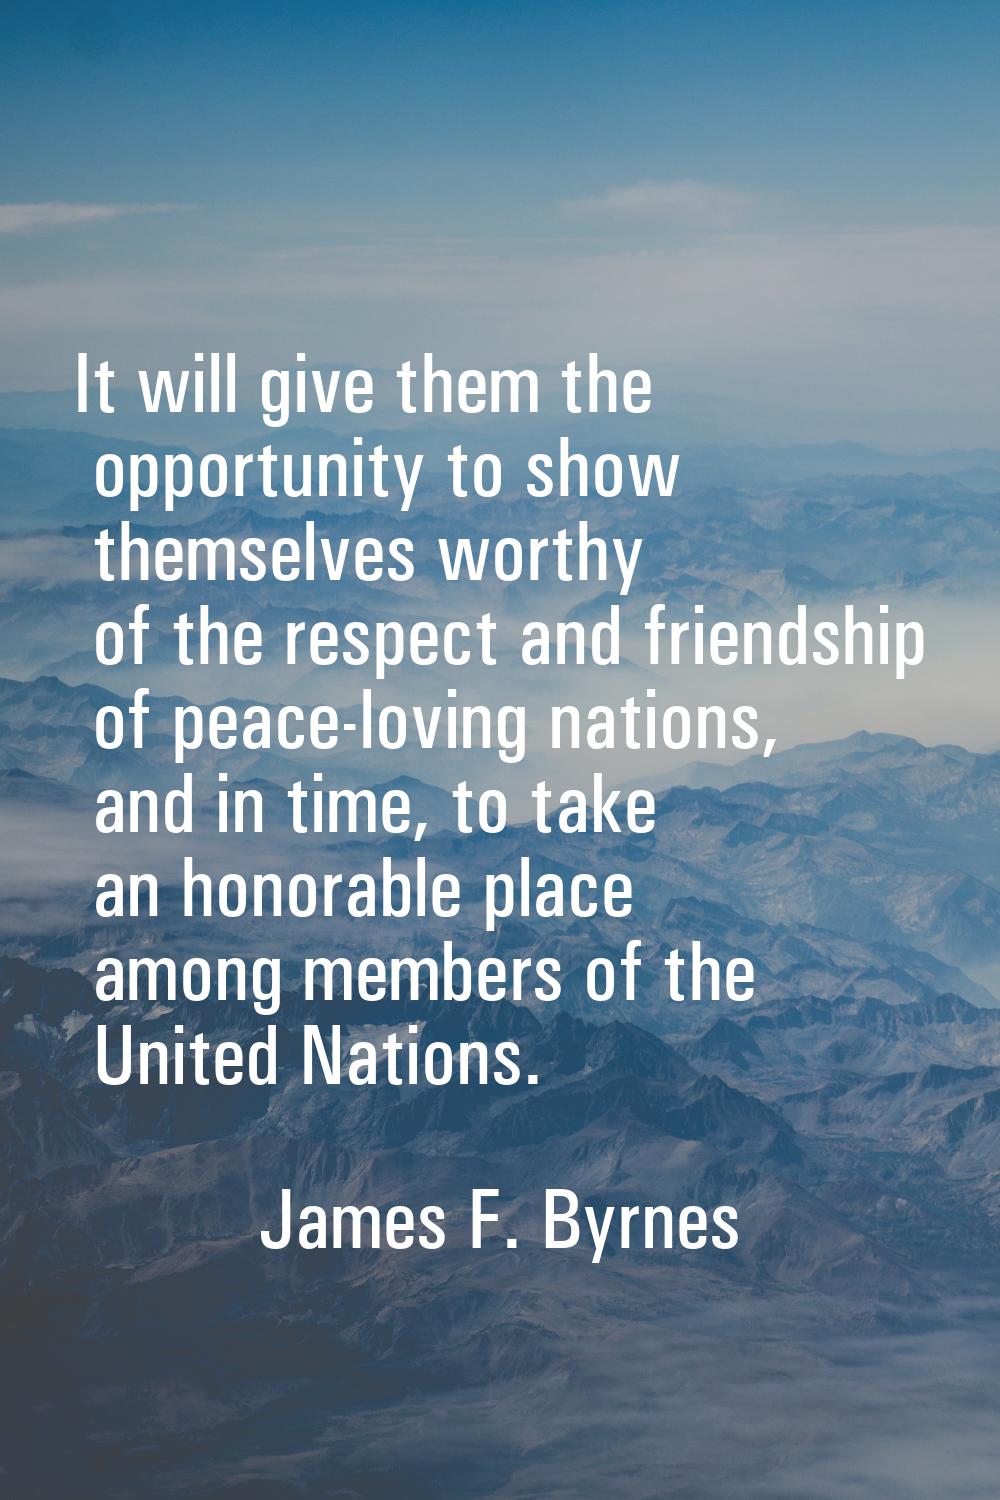 It will give them the opportunity to show themselves worthy of the respect and friendship of peace-